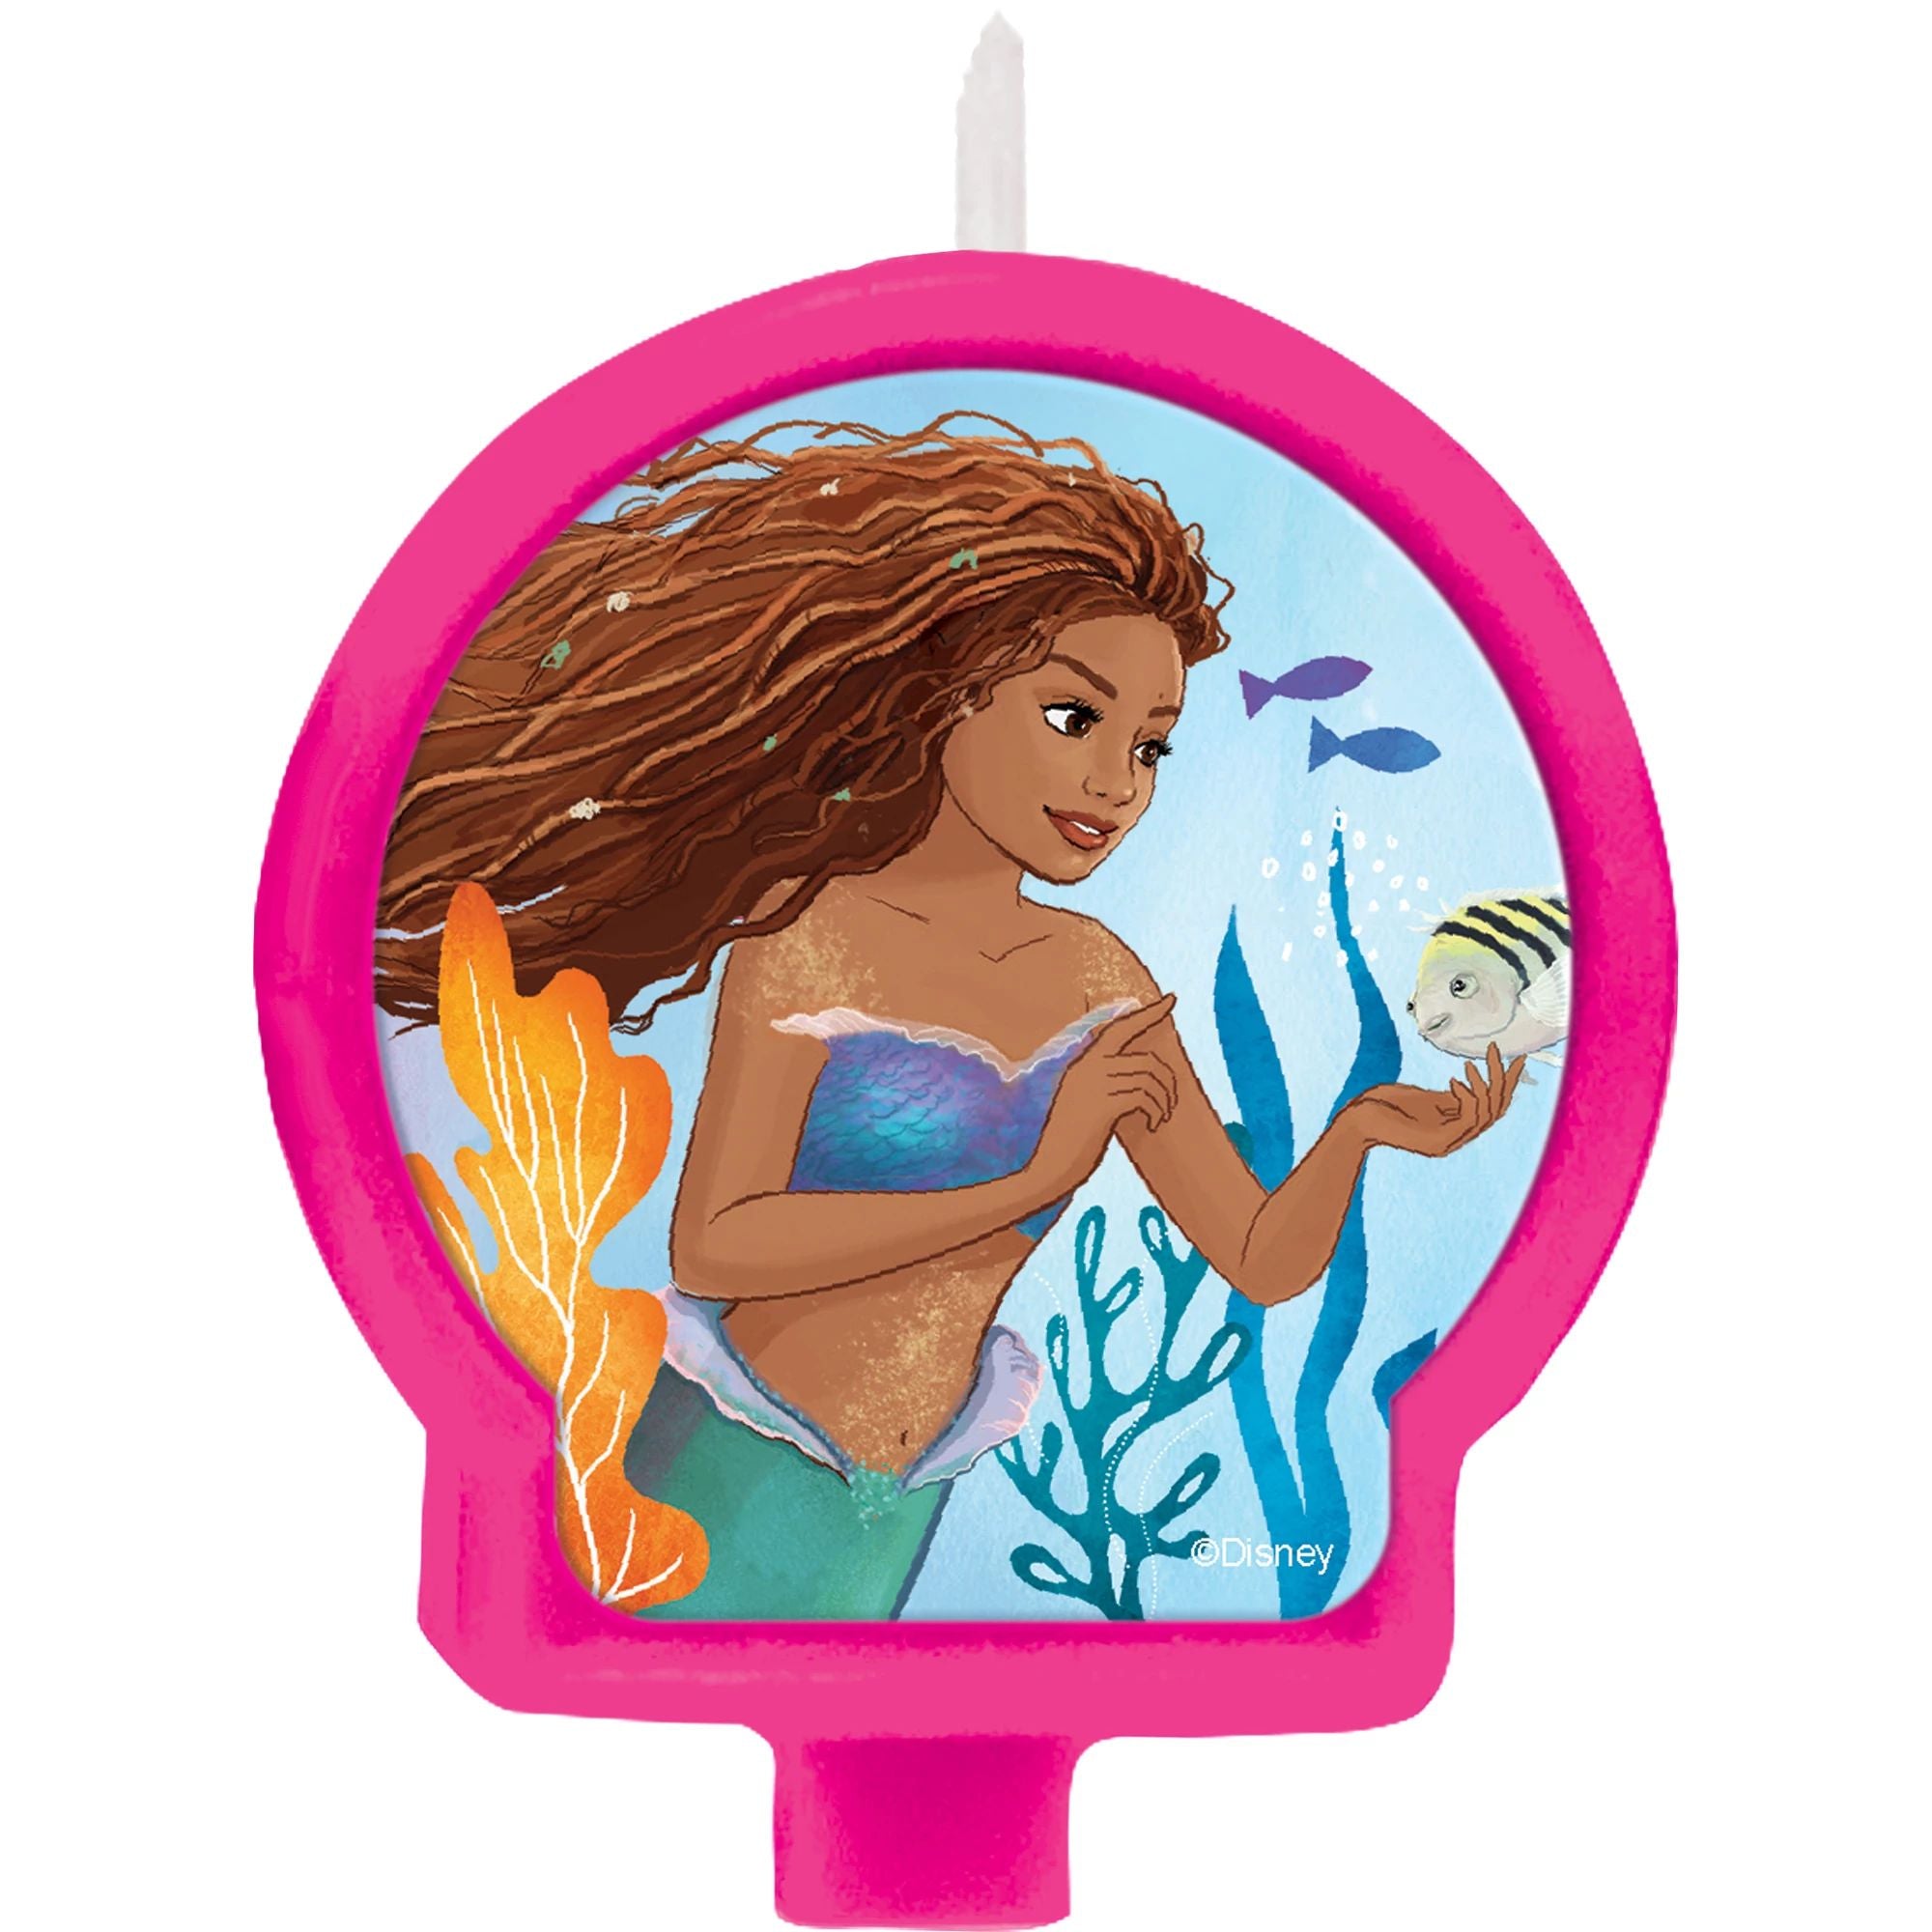 The Little Mermaid Birthday Candle